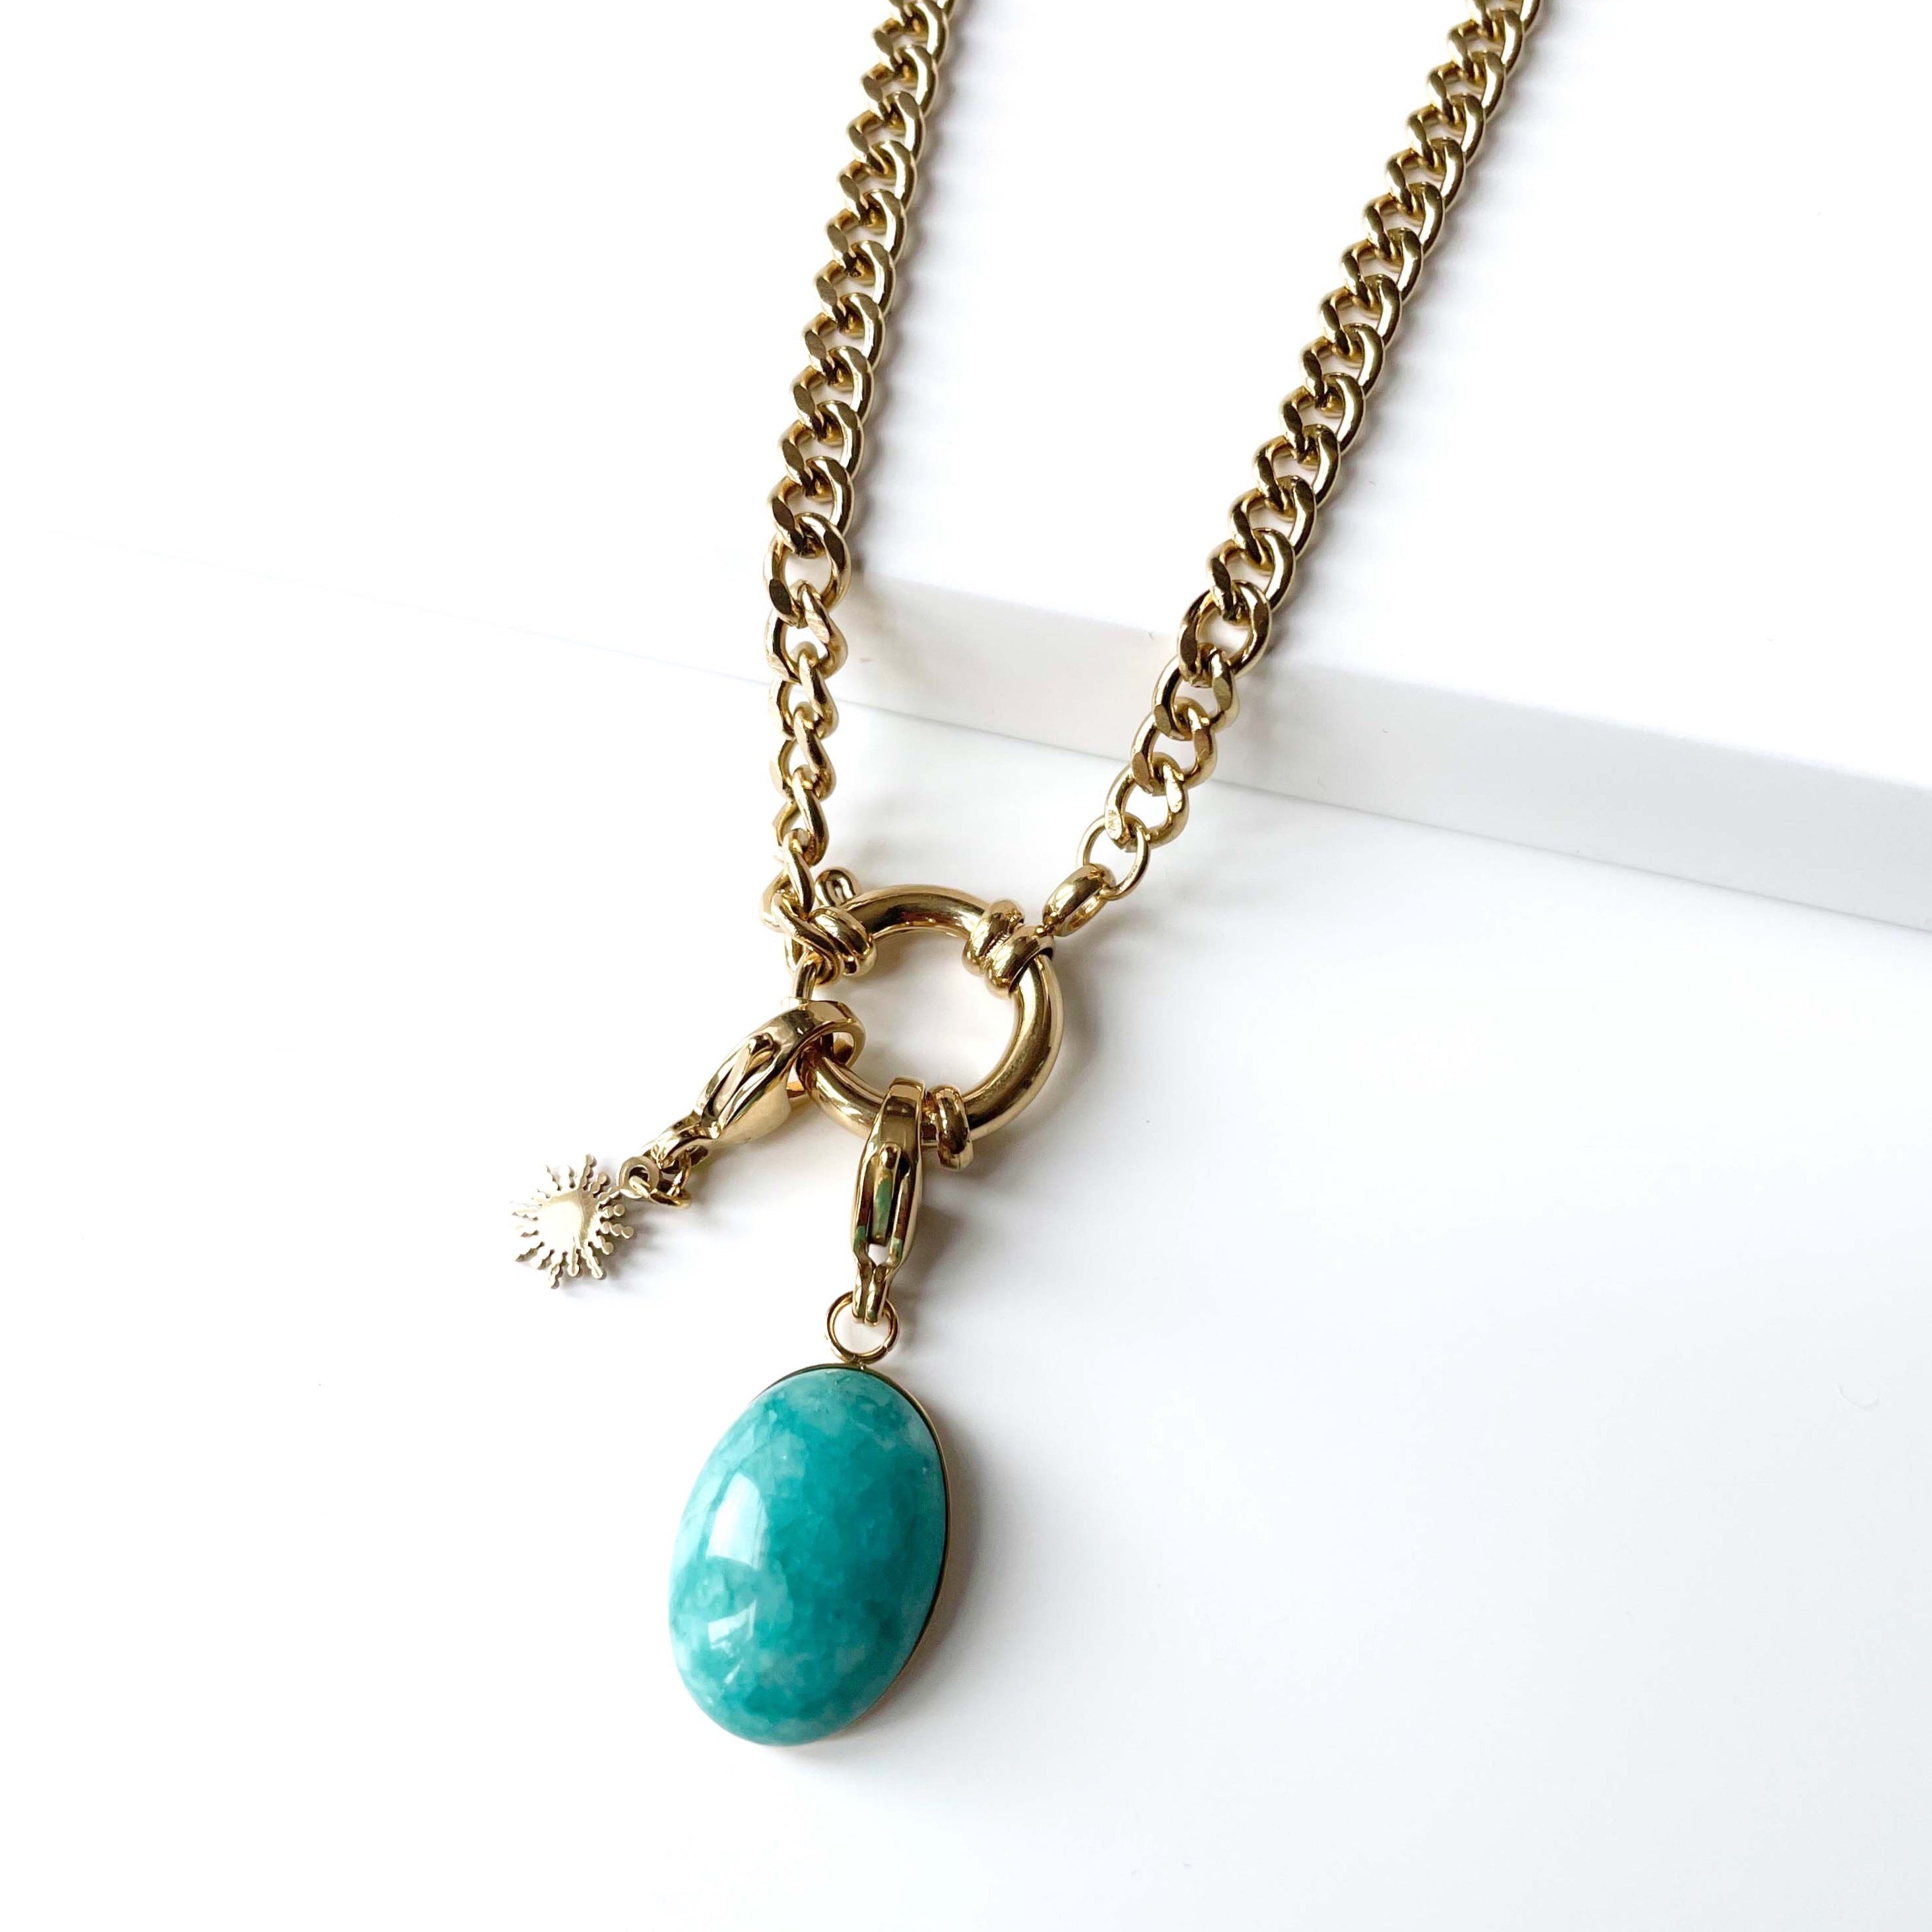 Stella Luxe 18k Gold Plated Turquoise Pendant Necklace